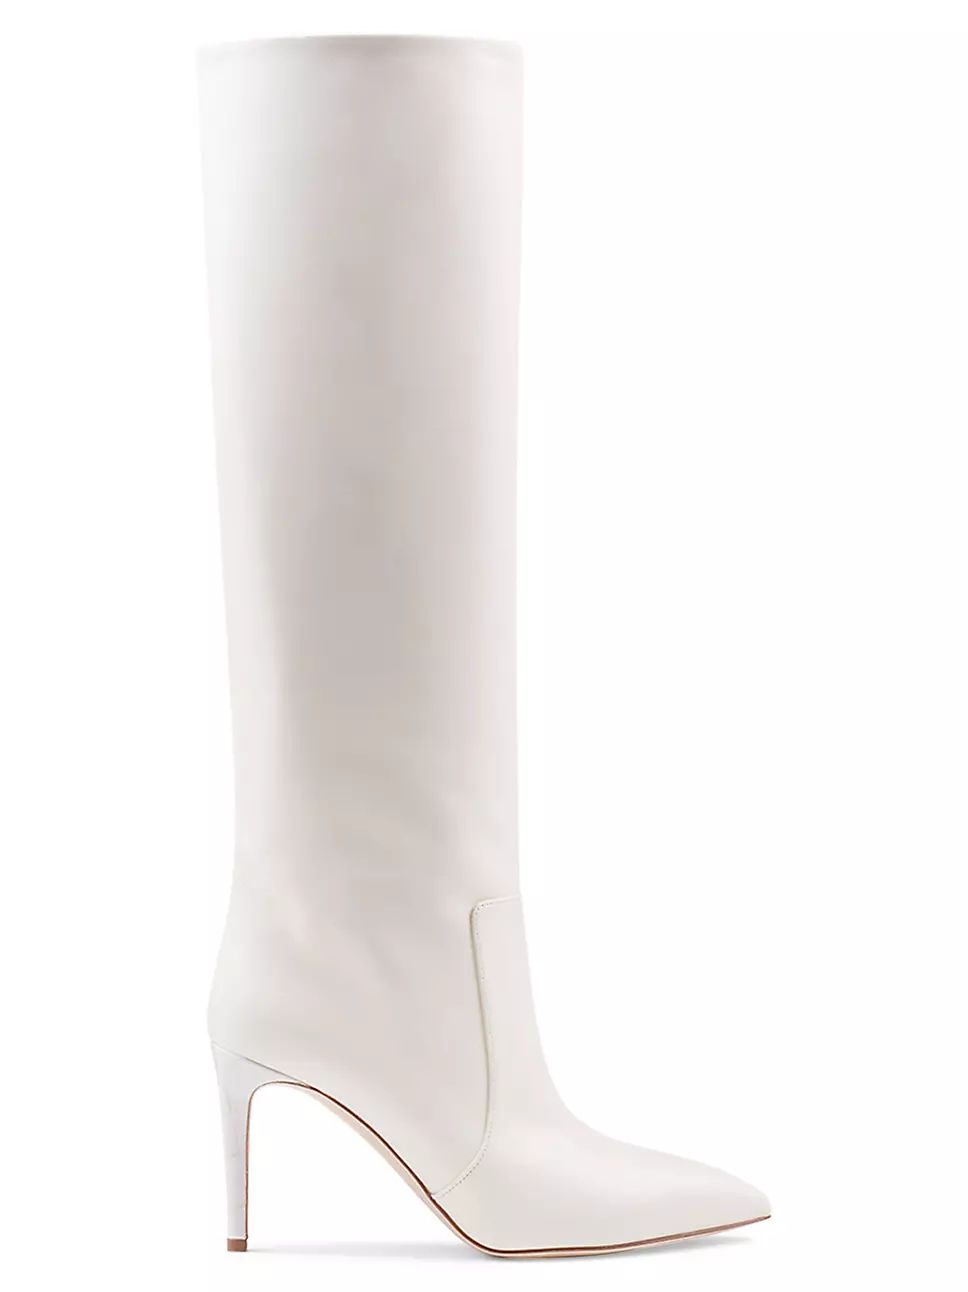 Knee-High Leather Stiletto Boots | Saks Fifth Avenue